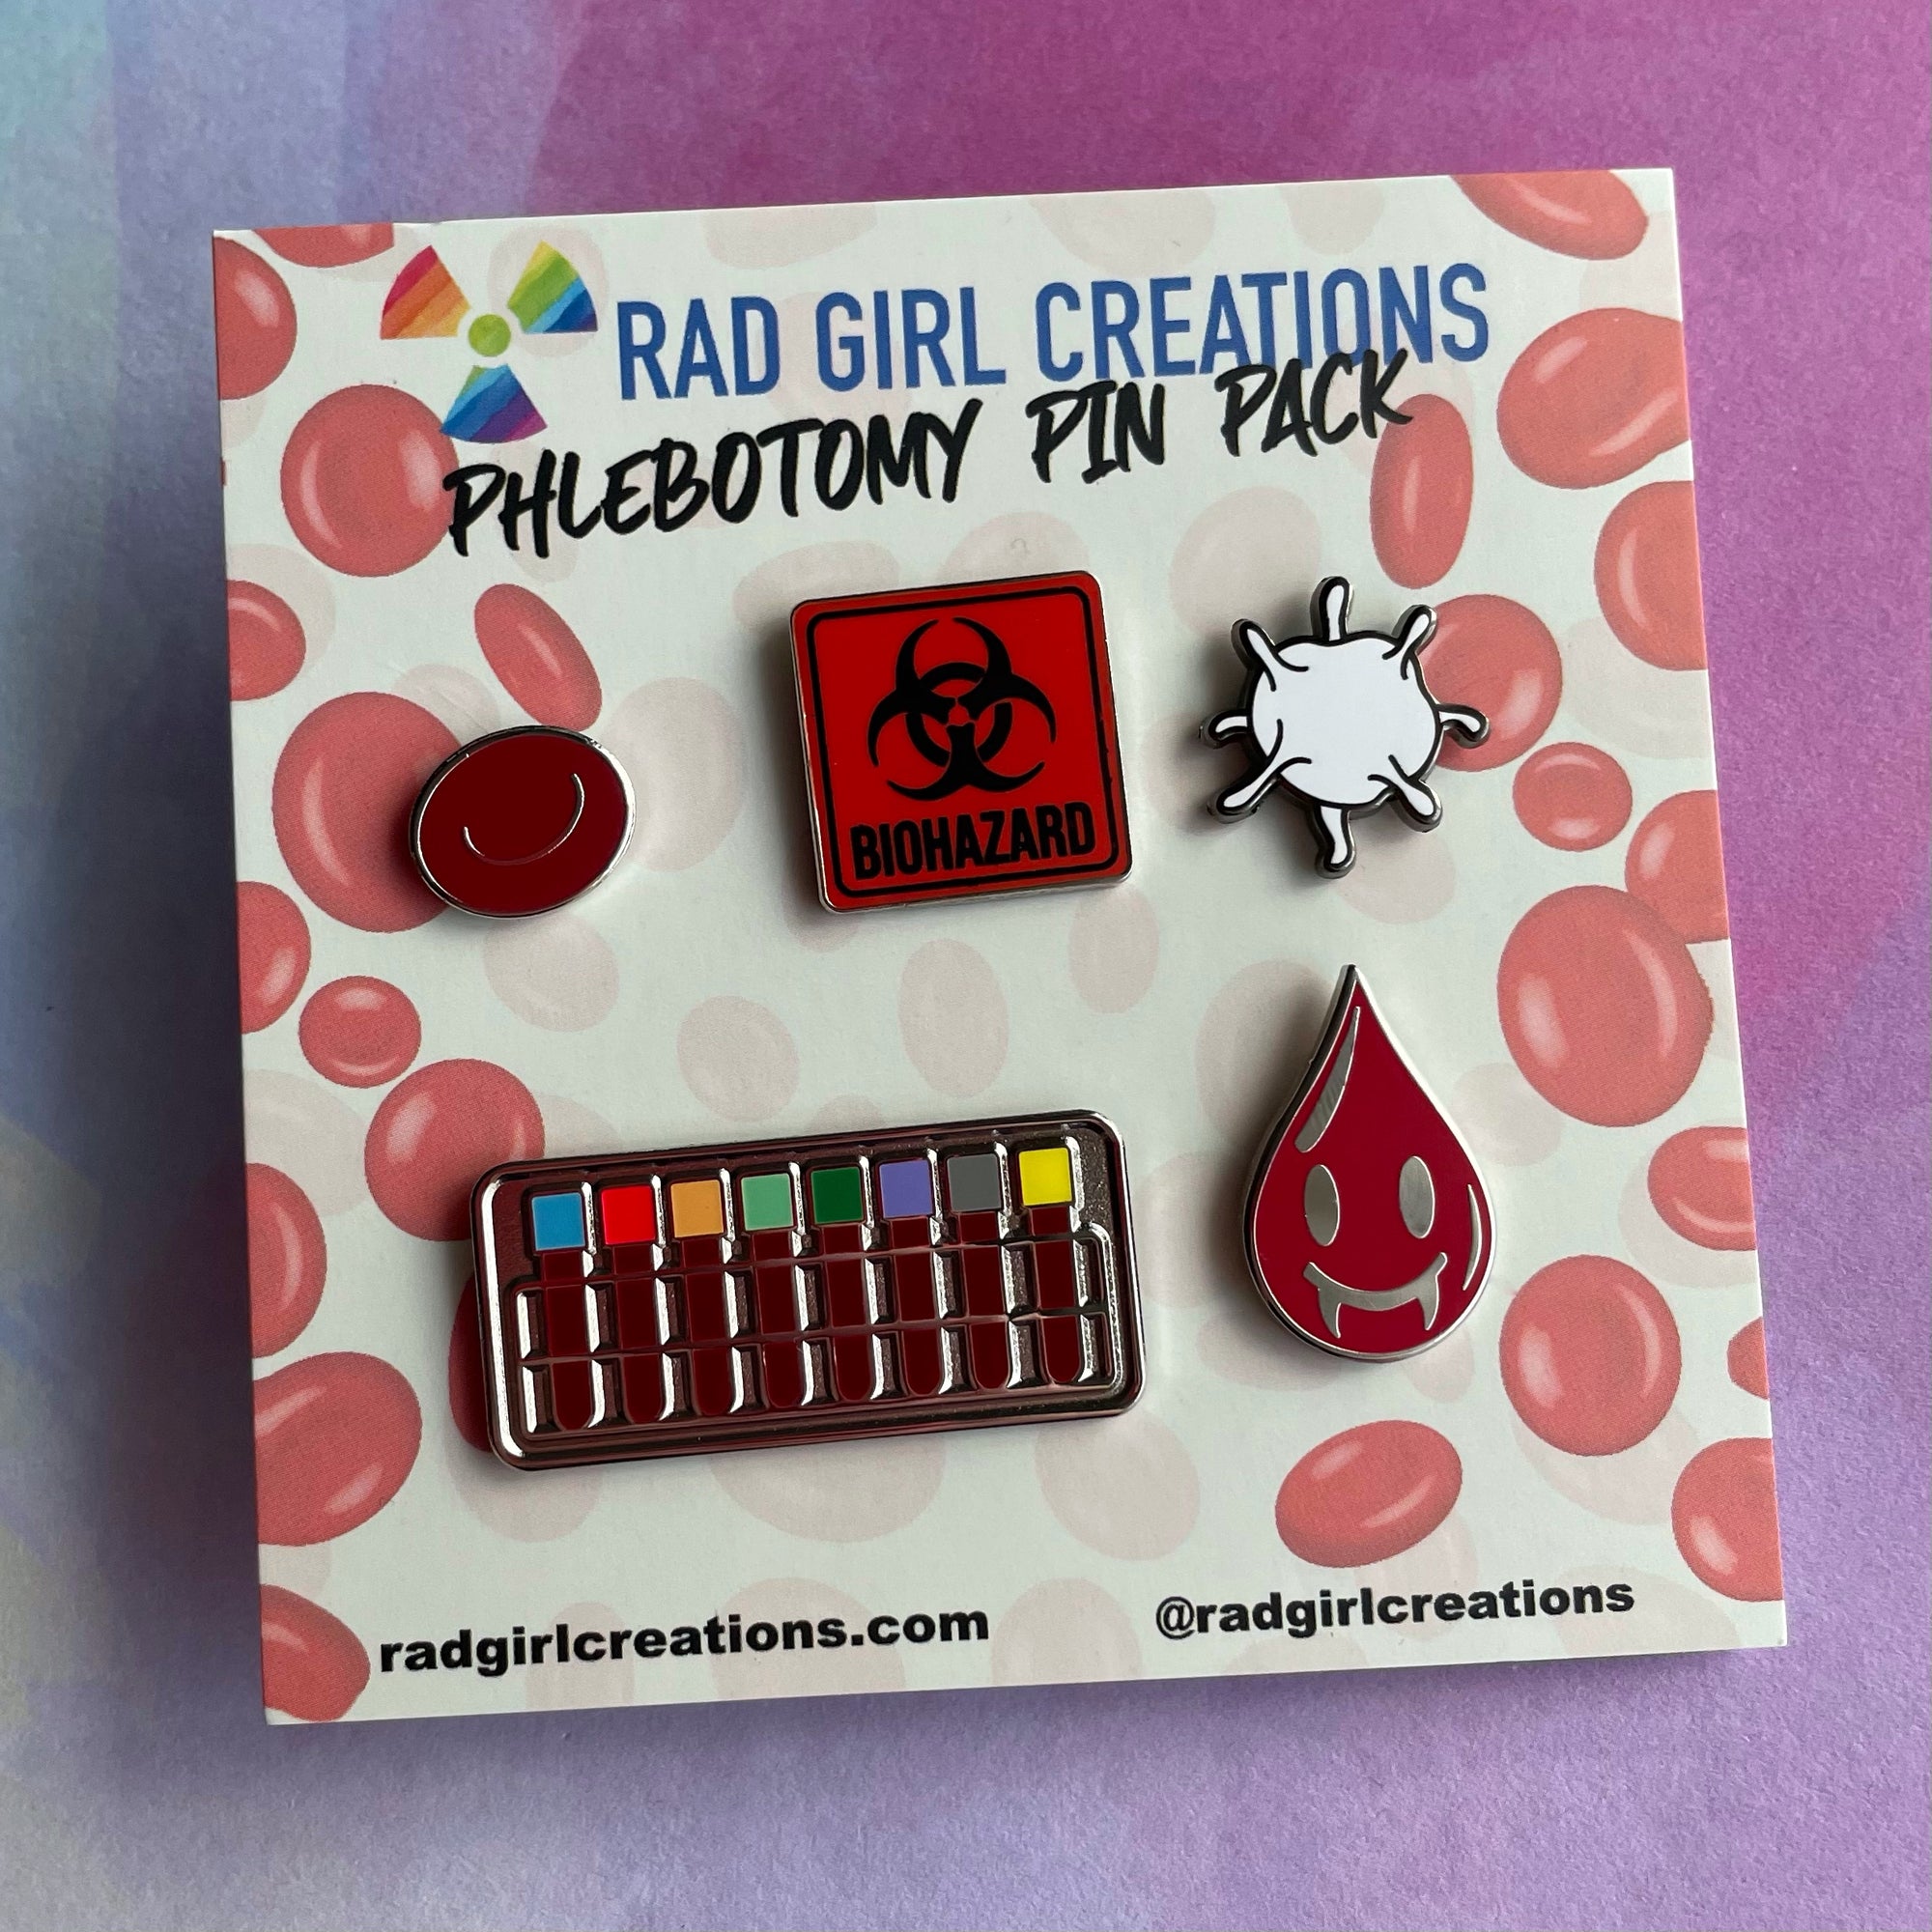 Phlebotomy Pin Pack - Rad Girl Creations